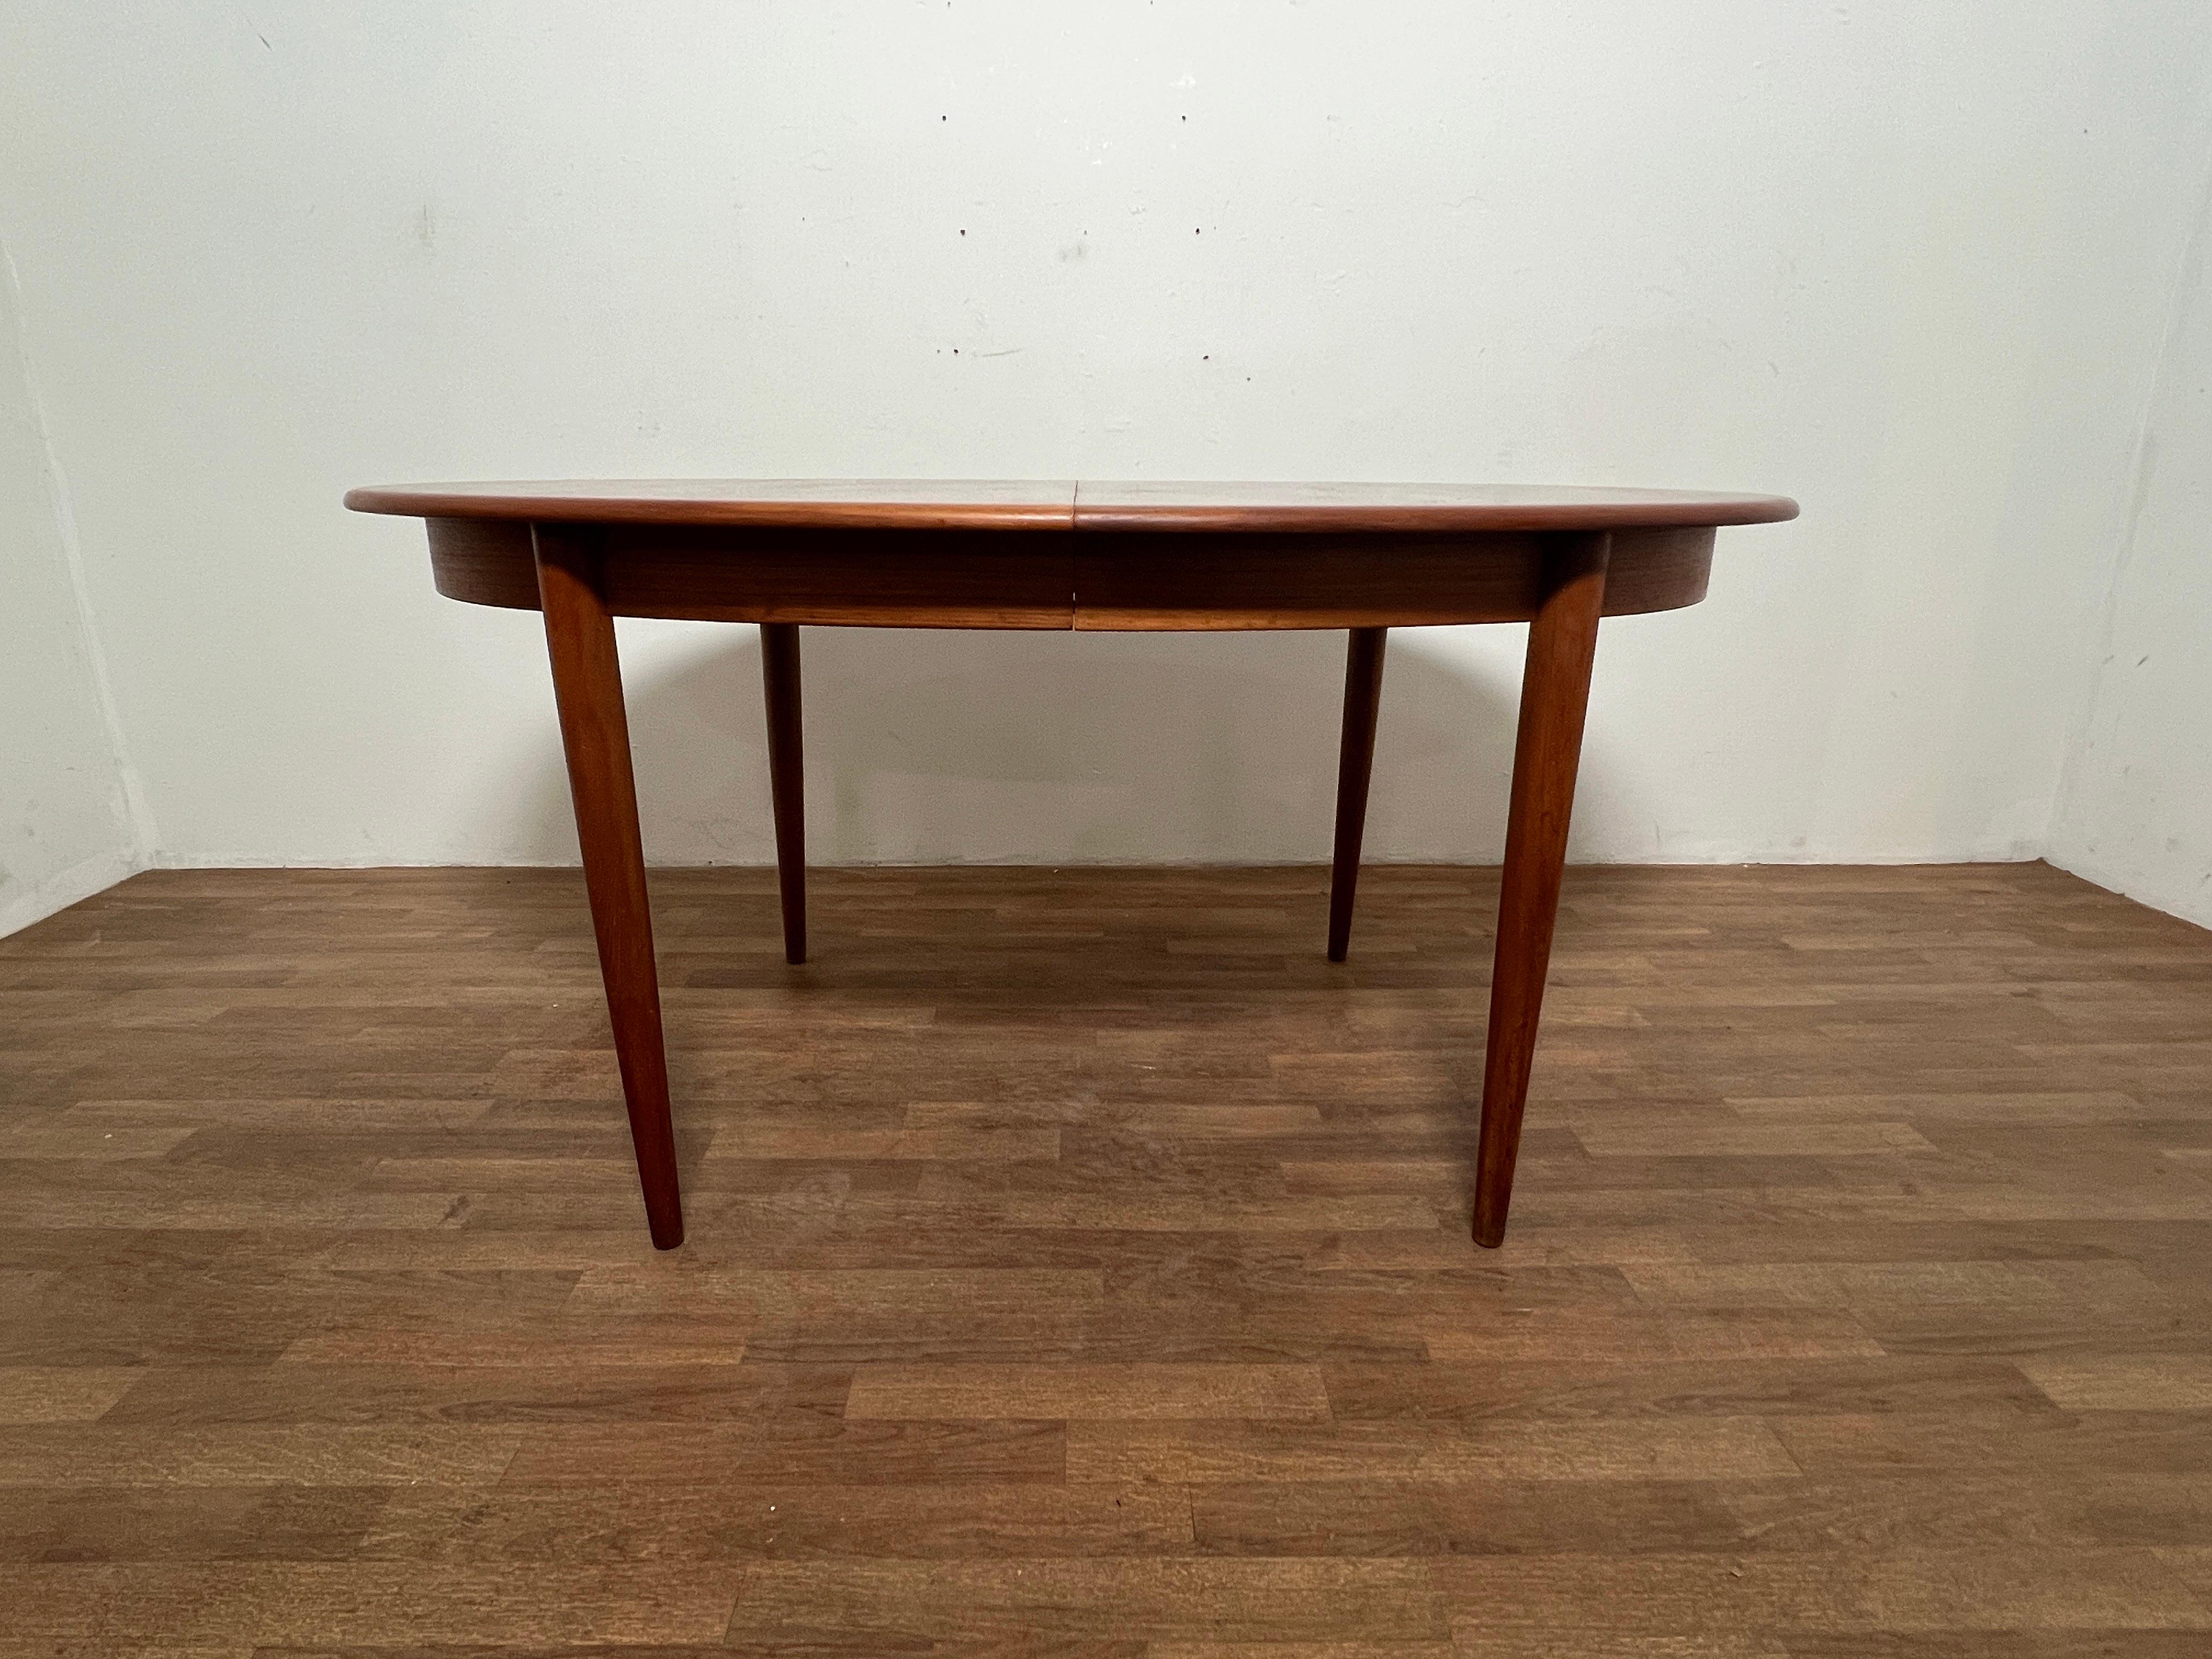 Danish Teak Oval Dining Table With Two Leaves by Gudme, Circa 1960s For Sale 3